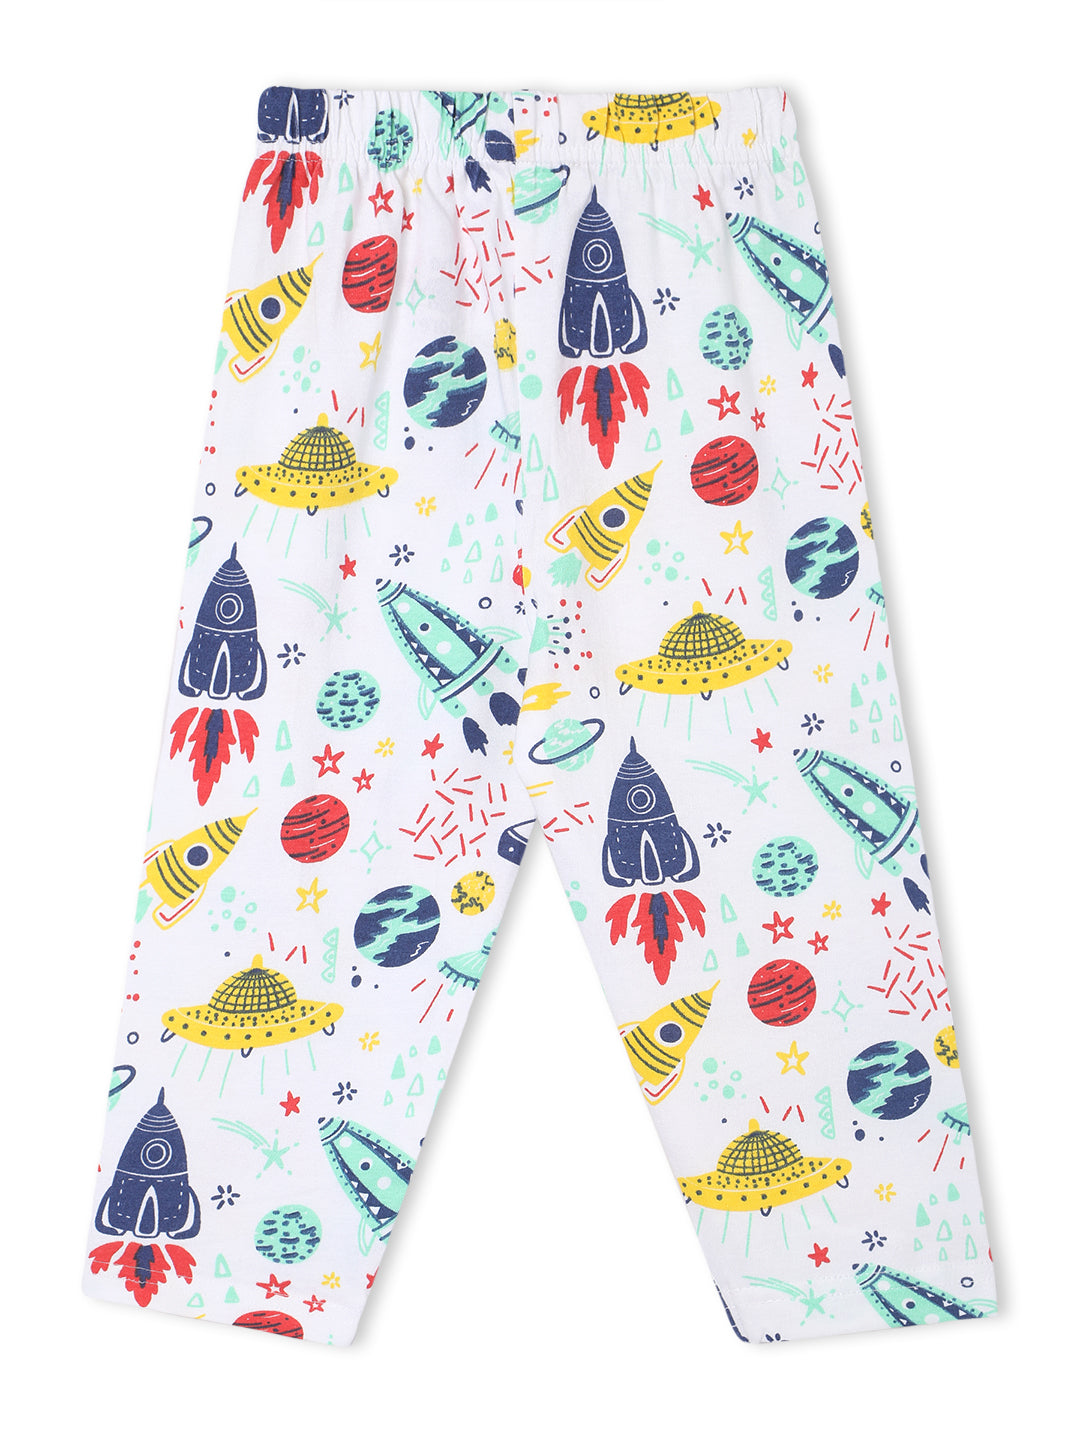 Baby and Kids Pajama Nightsuit Set - Tour to the Space (3)